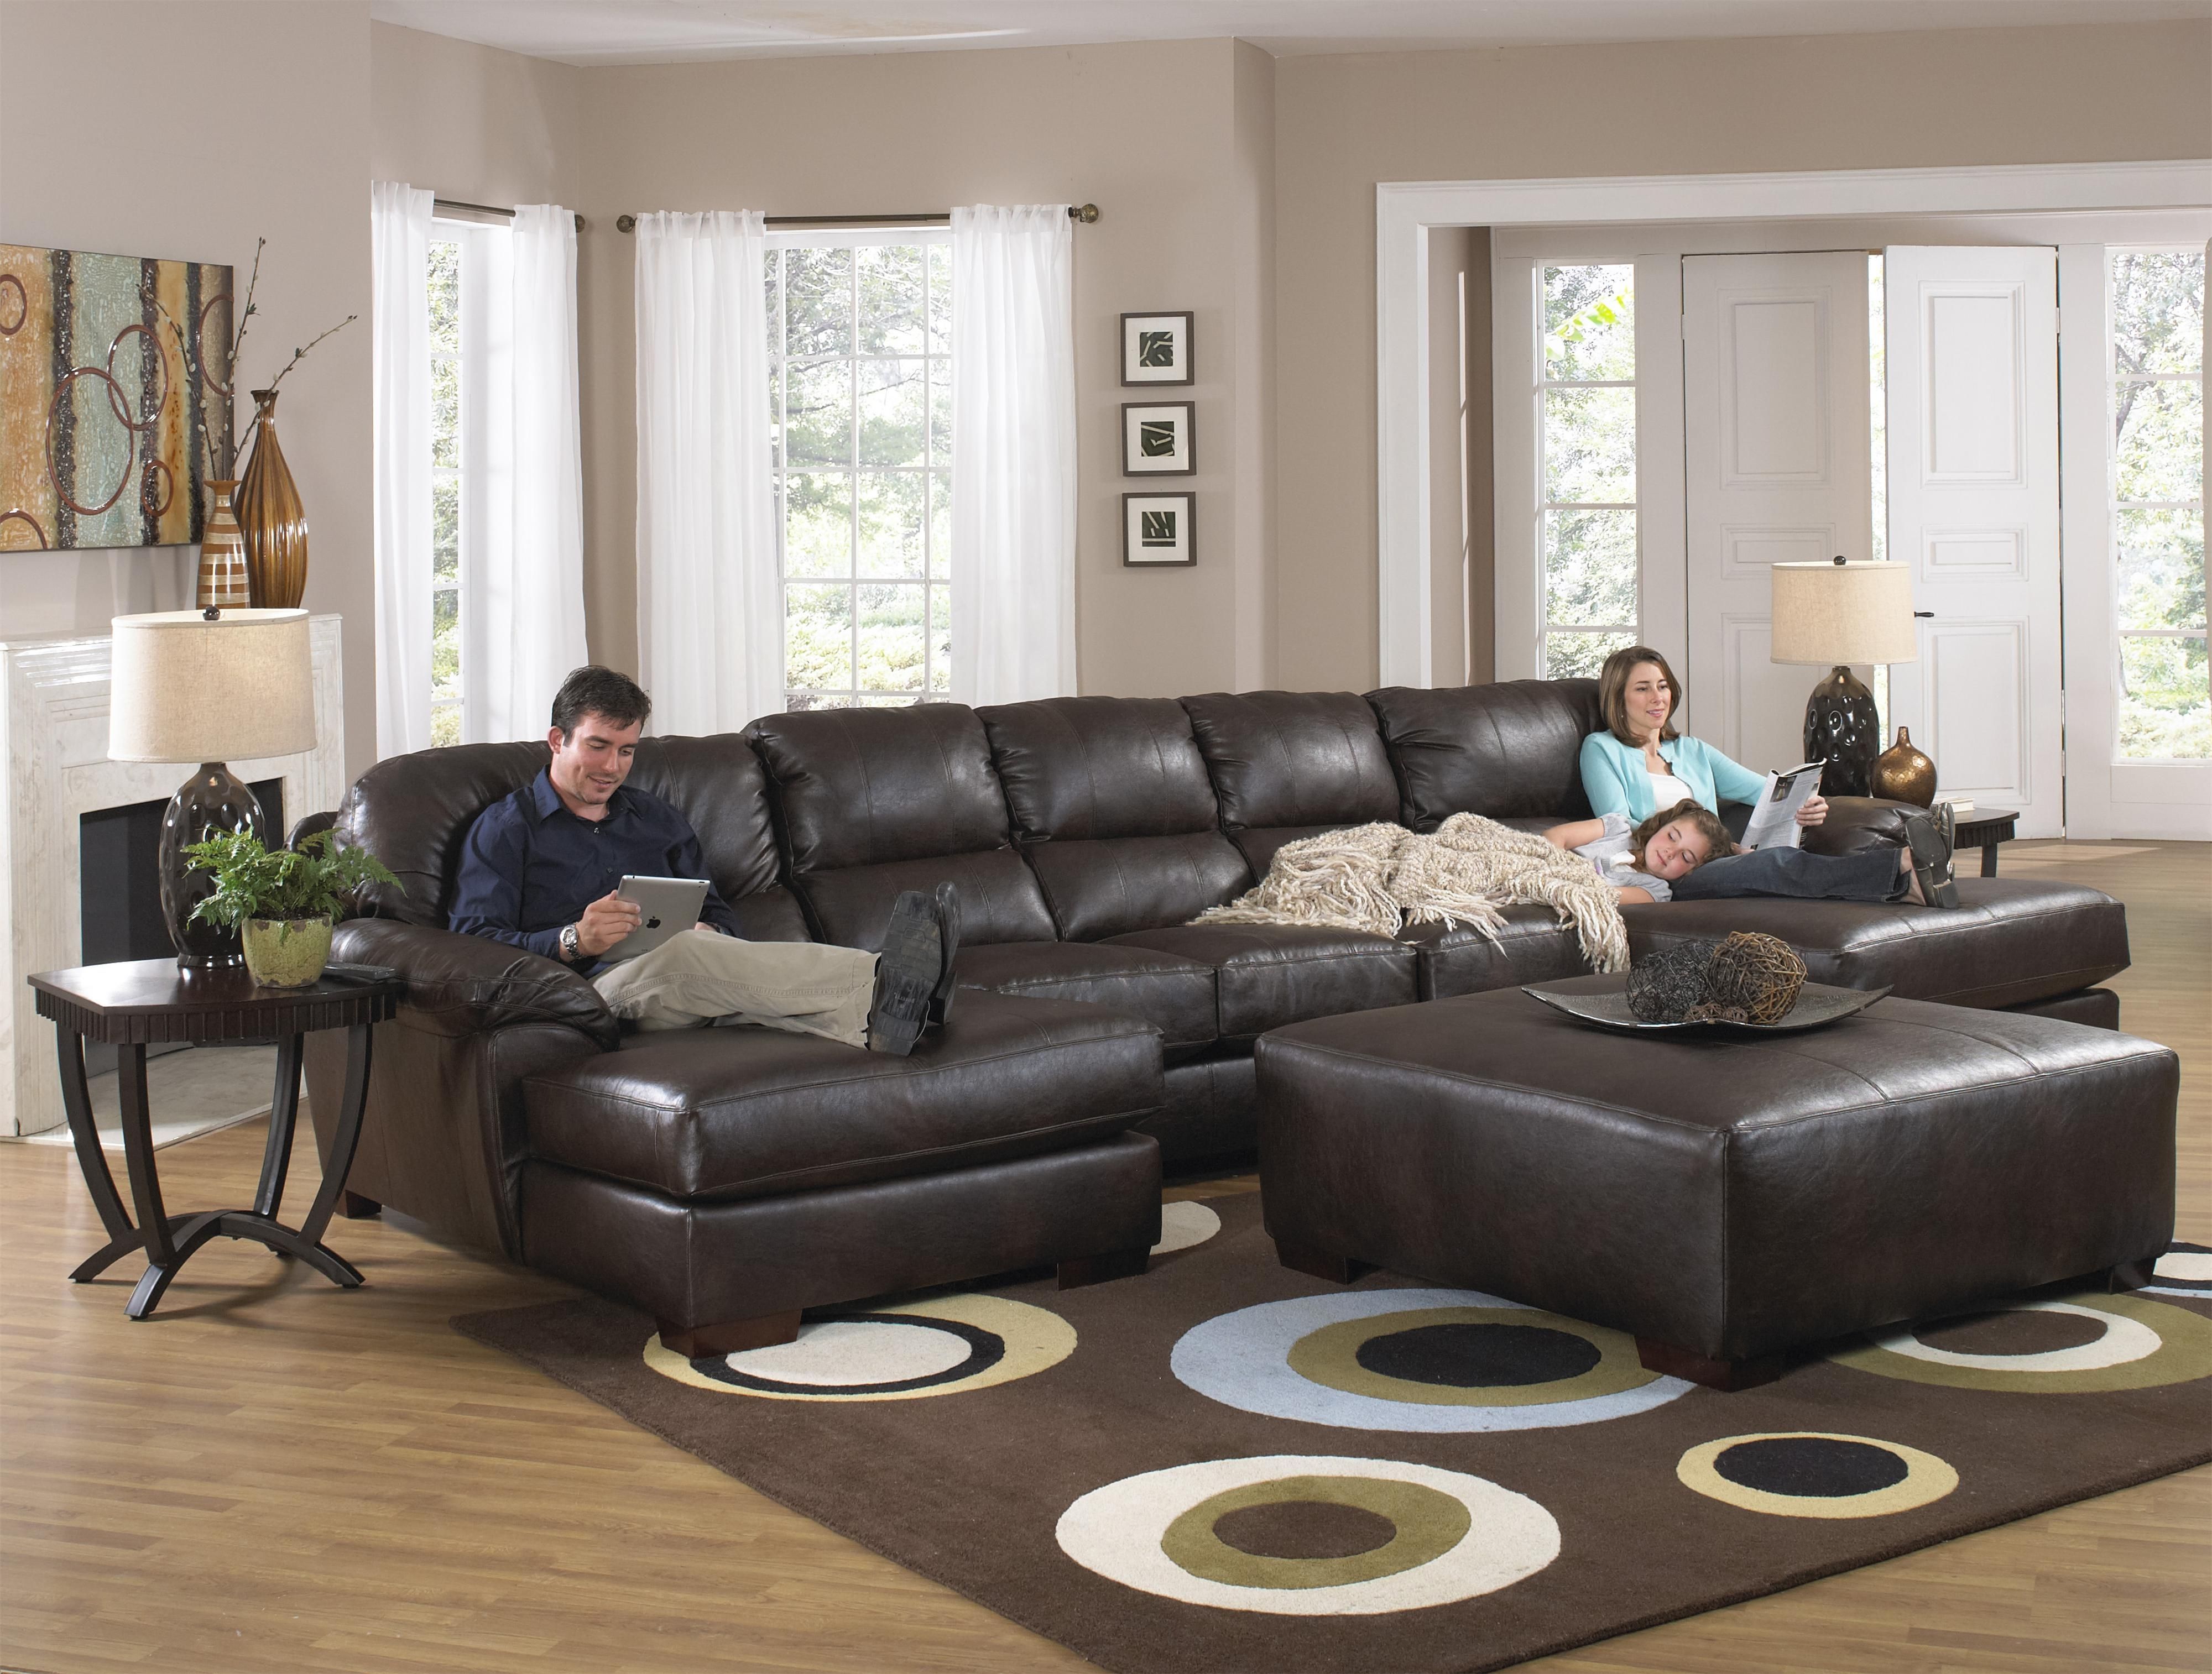 Newest Sofa : Beautiful Large Sectional Sofa With Chaise L Shaped Cream With Regard To Sectional Sofas (View 13 of 20)